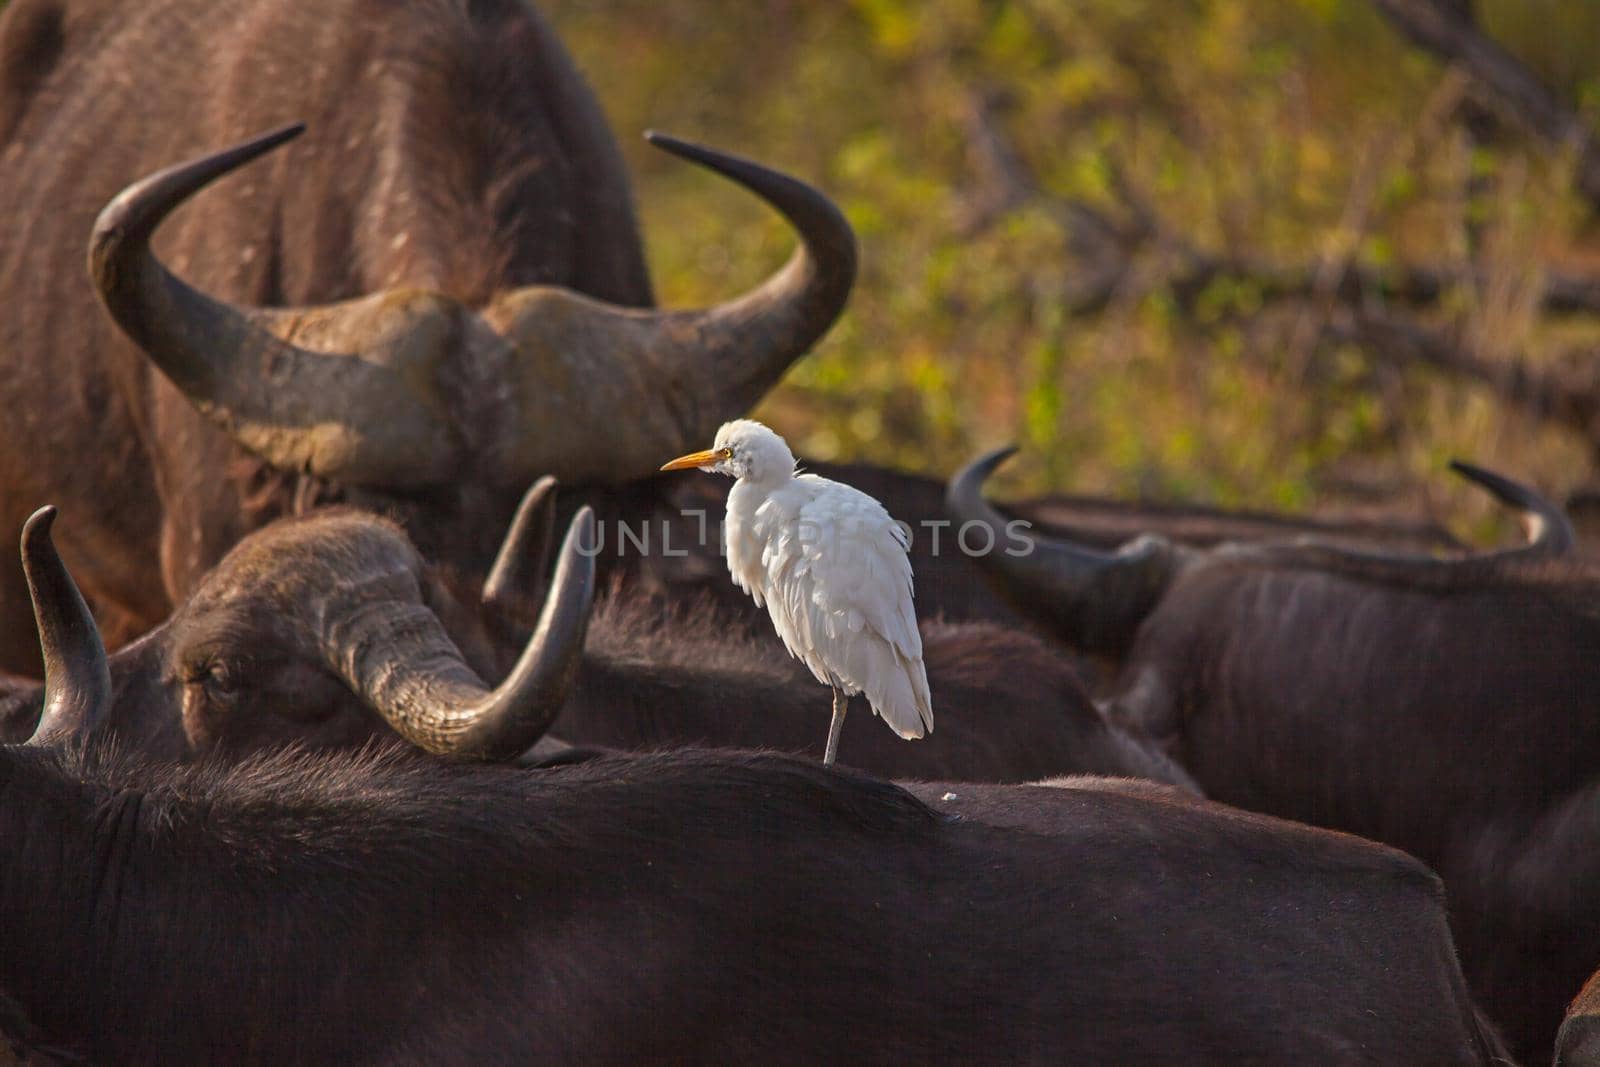 A white Cattle Egret (Bubulcus ibis) catching the first rays of sunight on the back of a sleeping Cape Buffalo (Syncerus caffer) in Kruger National Park. South Africa